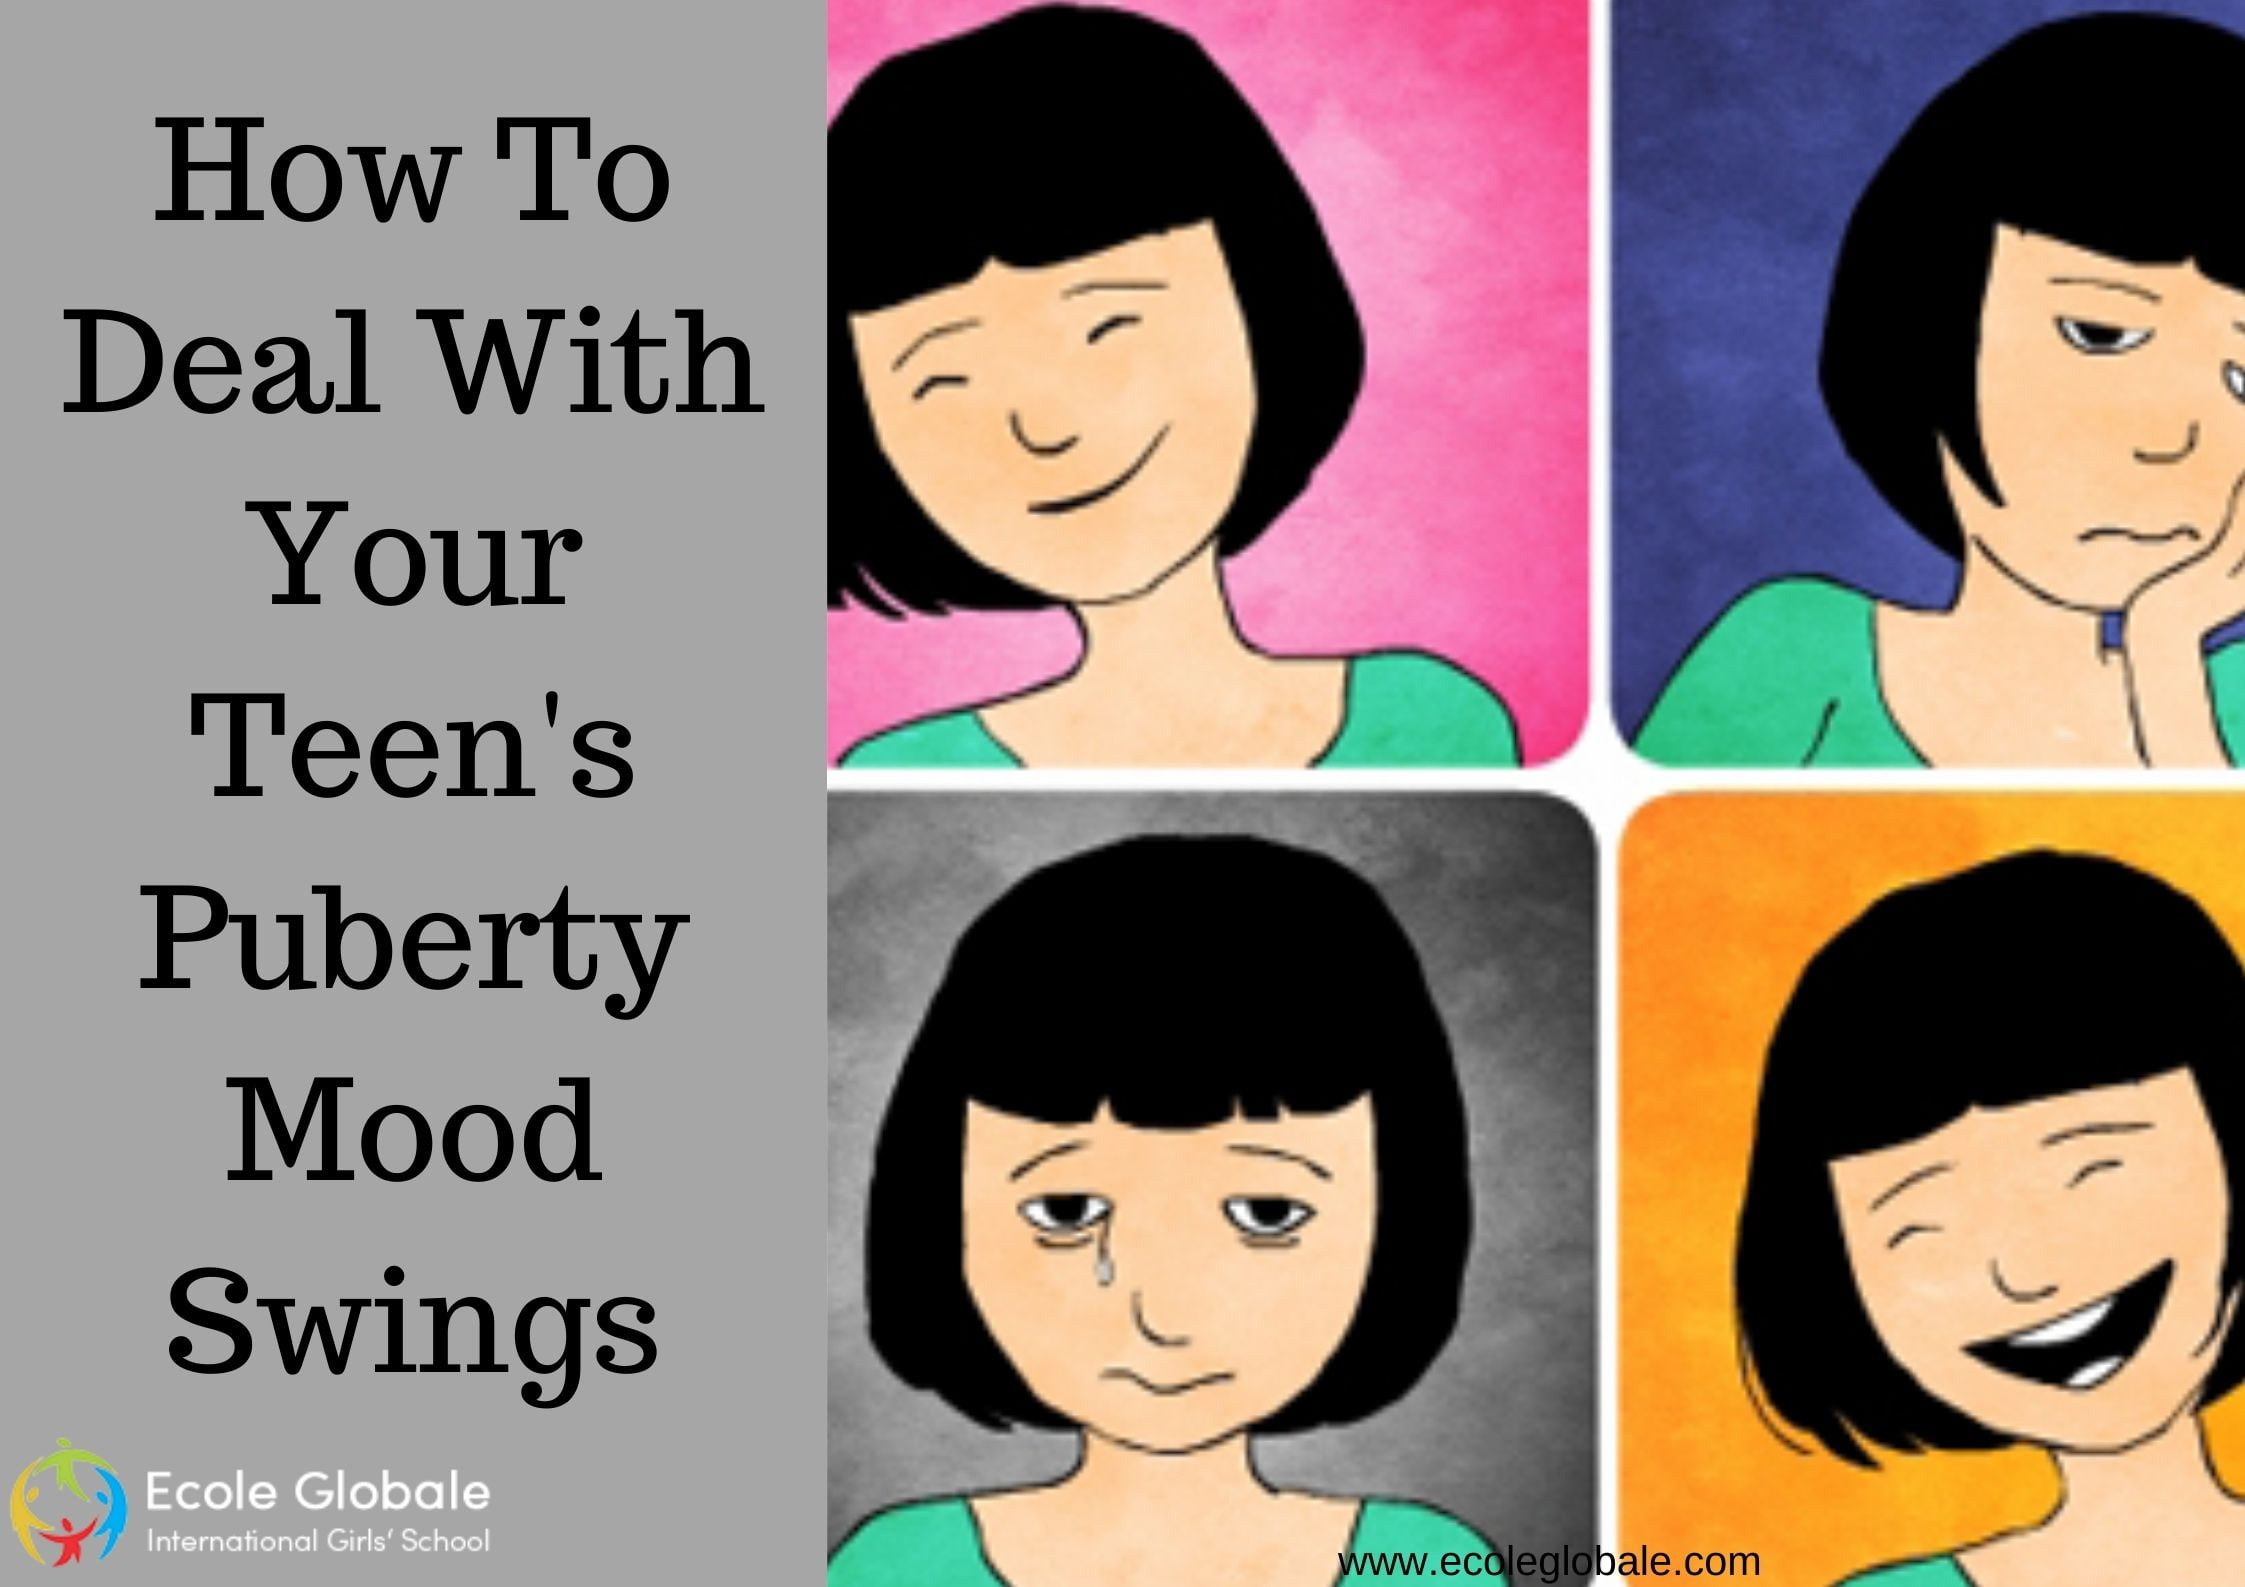 How To Deal With Your Teen’s Puberty Mood Swings